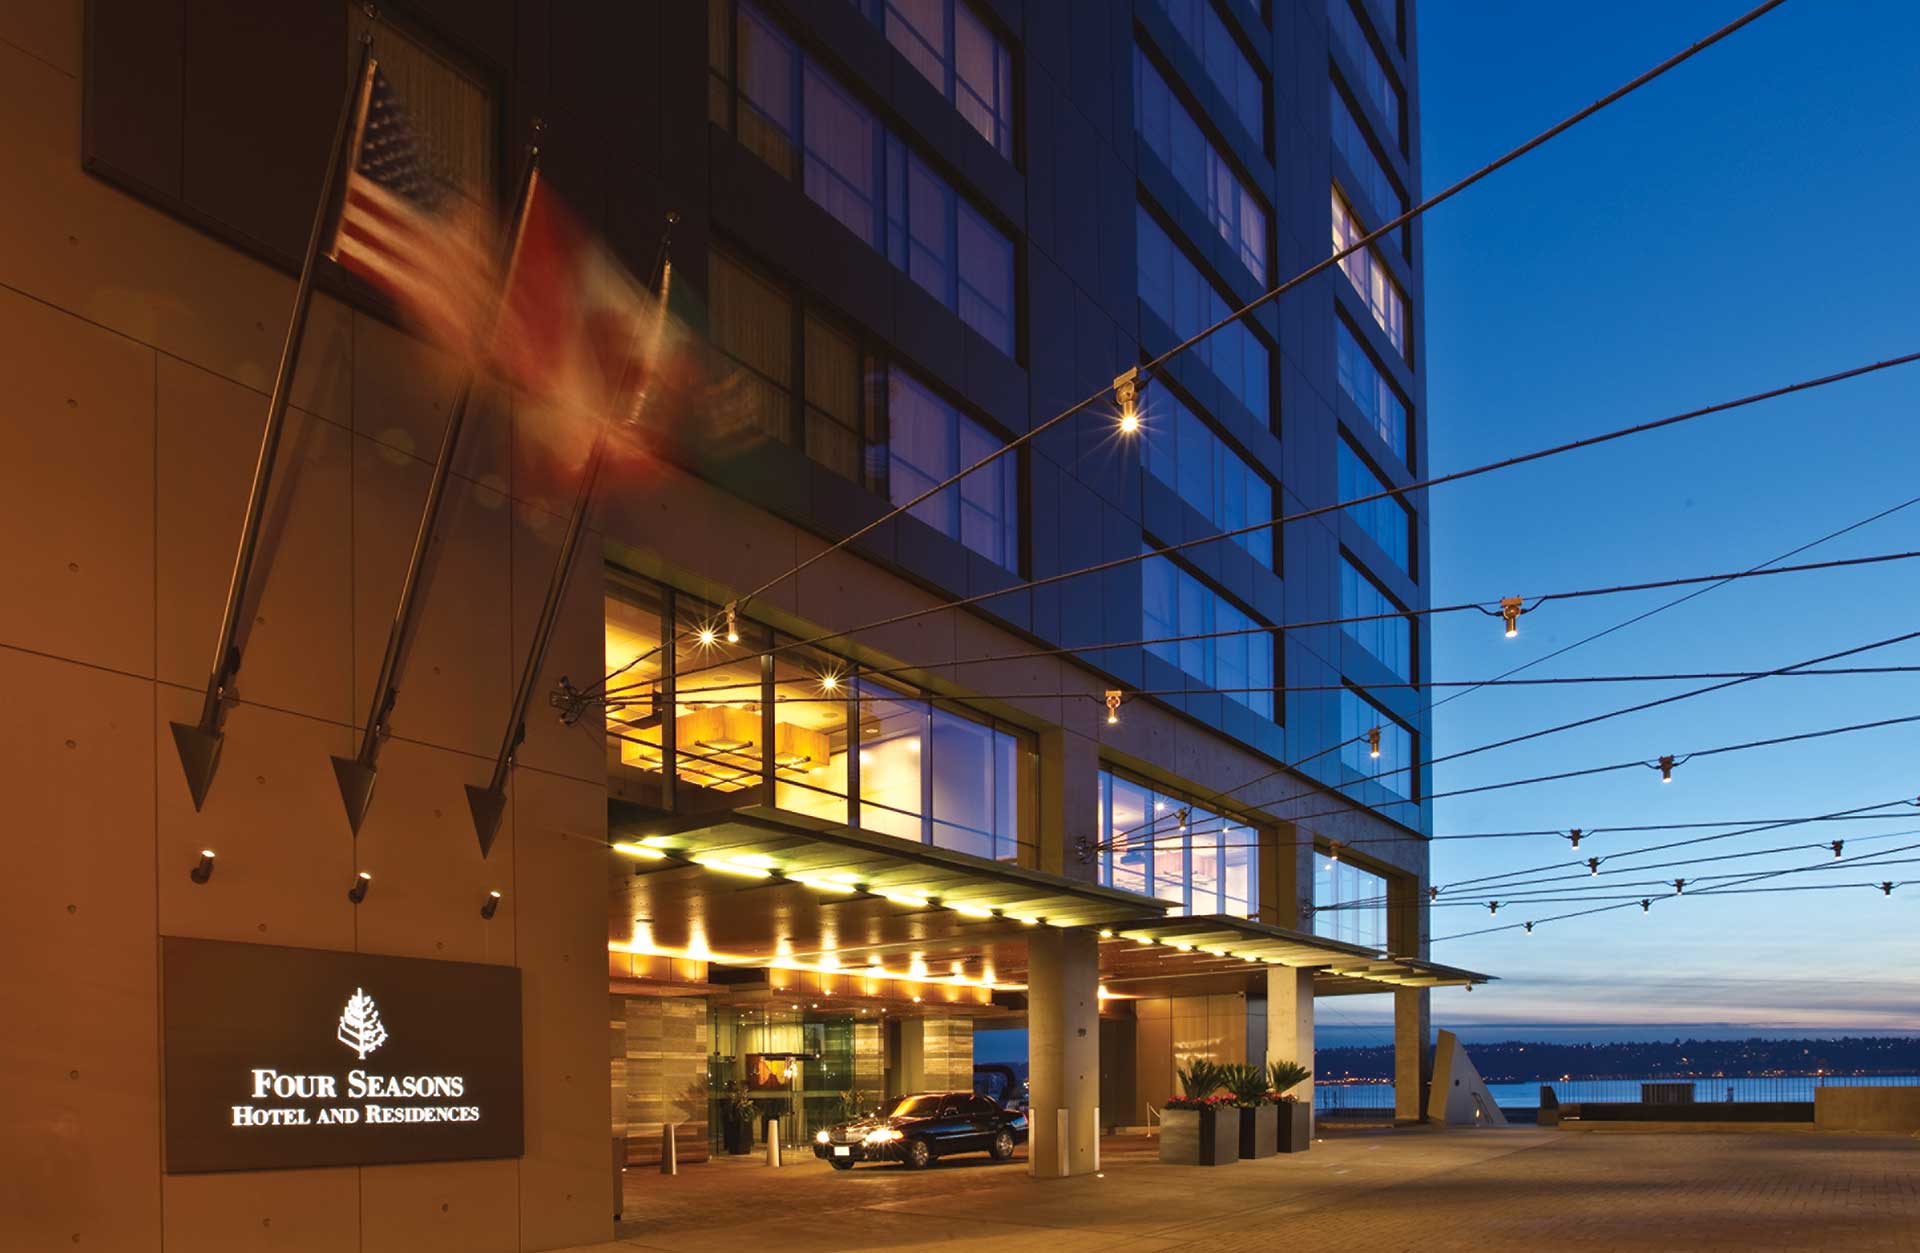 Four Seasons Hotel and Residences Seattle exterior at night